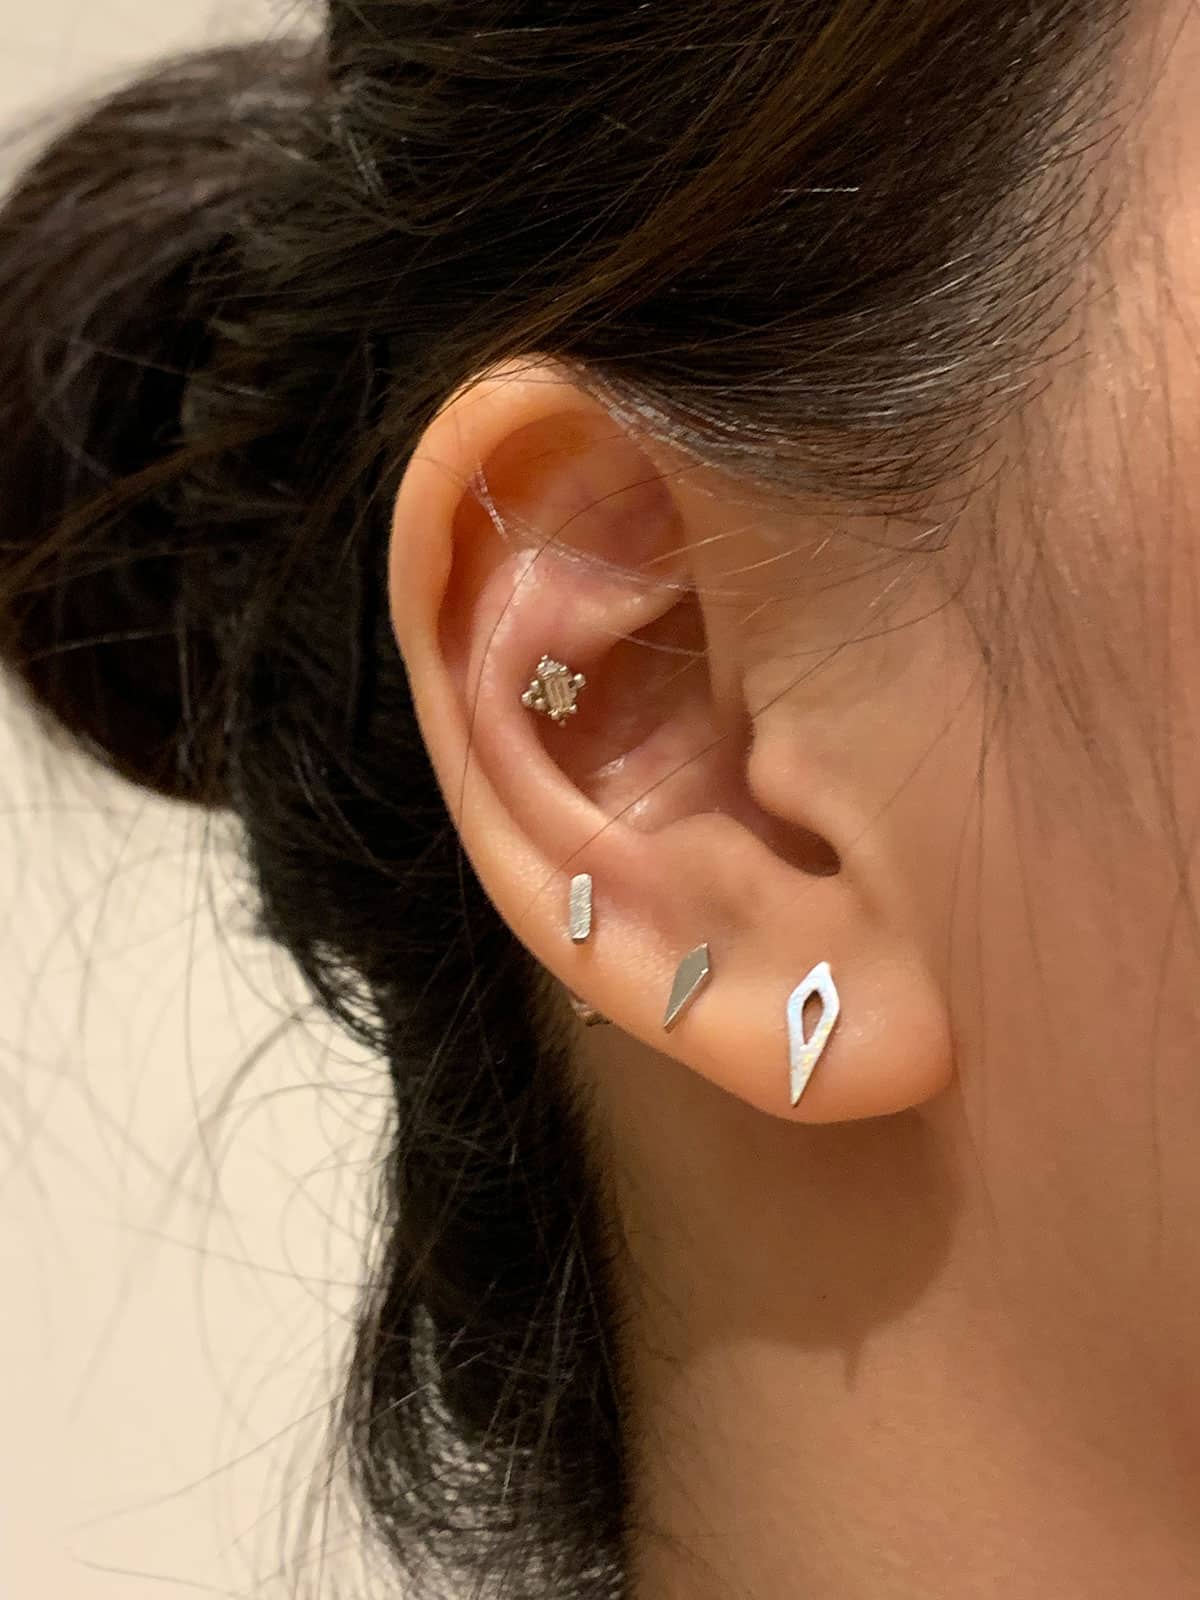 A closeup of a woman’s ear. She has dark hair that is tied back. Her ears have three silver earrings on the lobe and a smaller silver one near the inner ear.